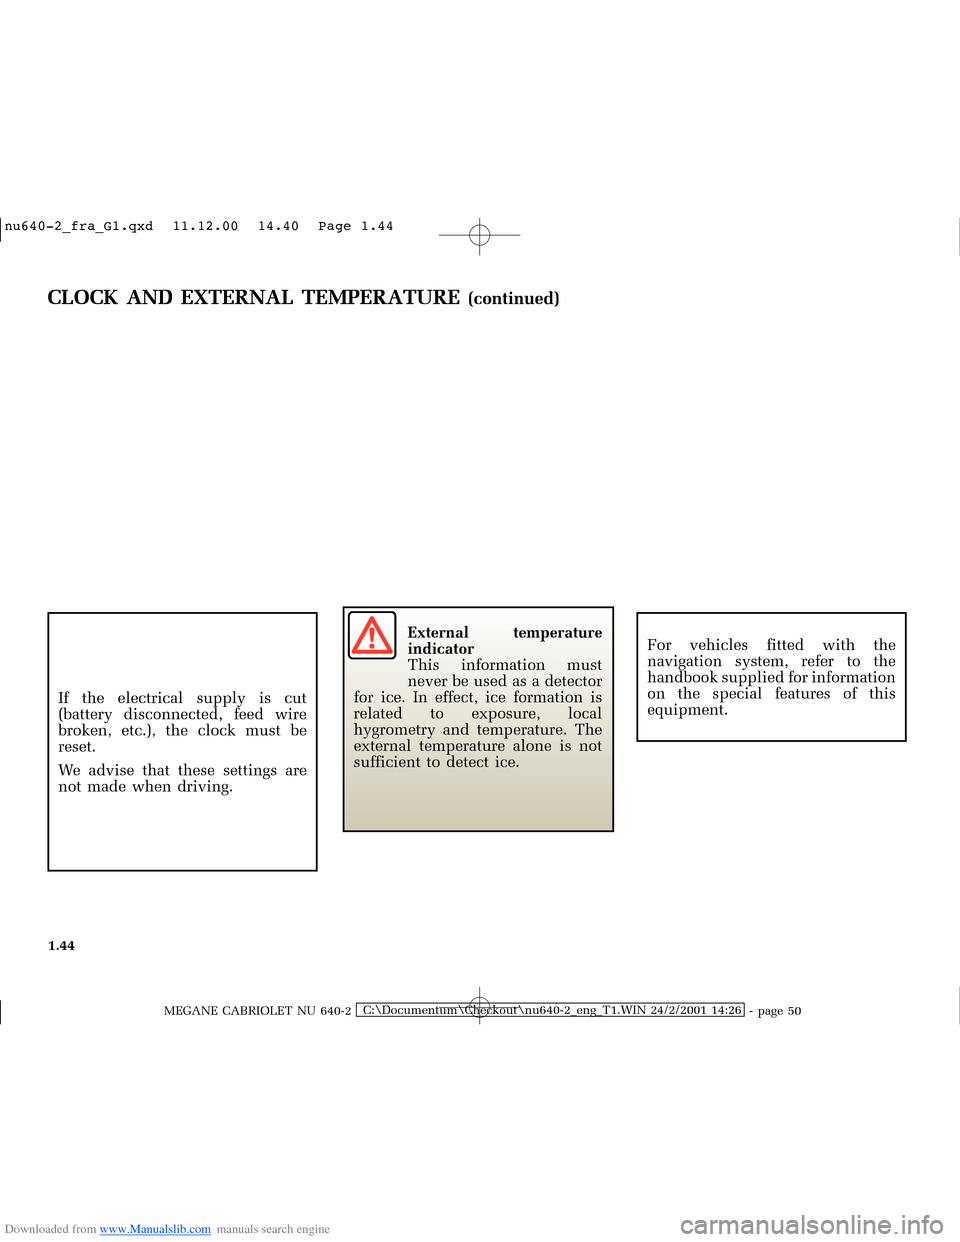 RENAULT MEGANE 2000 X64 / 1.G Service Manual Downloaded from www.Manualslib.com manuals search engine �Q�X������B�I�U�D�B�*���T�[�G� � ��������� � ������ � �3�D�J�H� ����
MEGANE CABRIOLET NU 640-2C:\Documentum\Chec